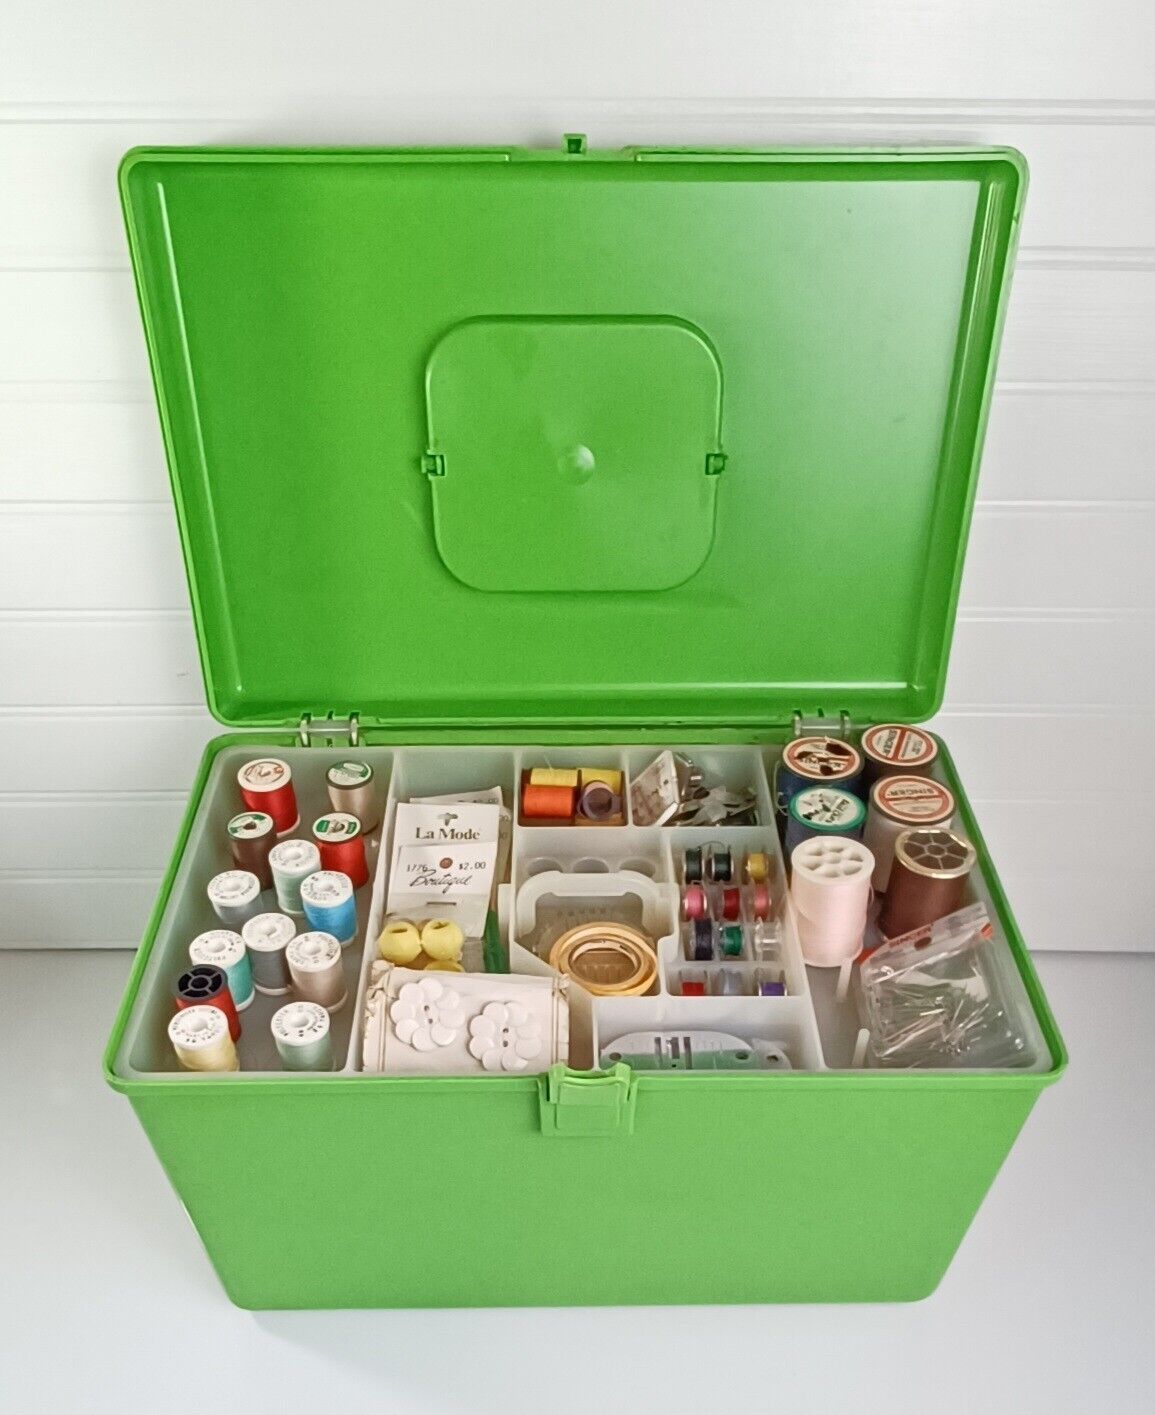 Vintage Wil-Hold Sewing Box Retro Spring Green, Filled with Misc. Sewing Notions